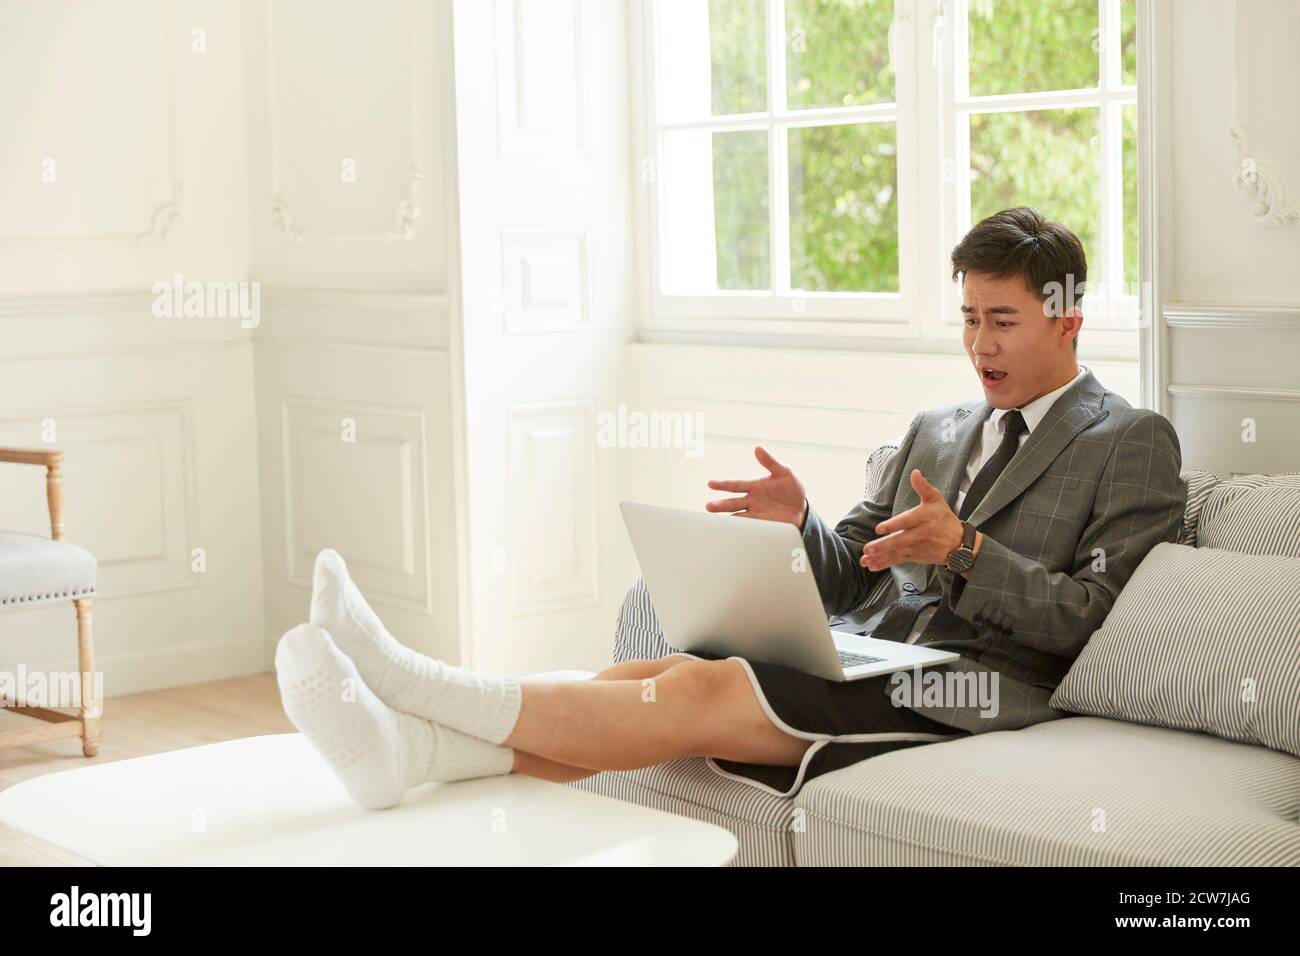 young asian business man wearing suit and shorts working from home meeting with colleagues online using video chat on laptop computer Stock Photo